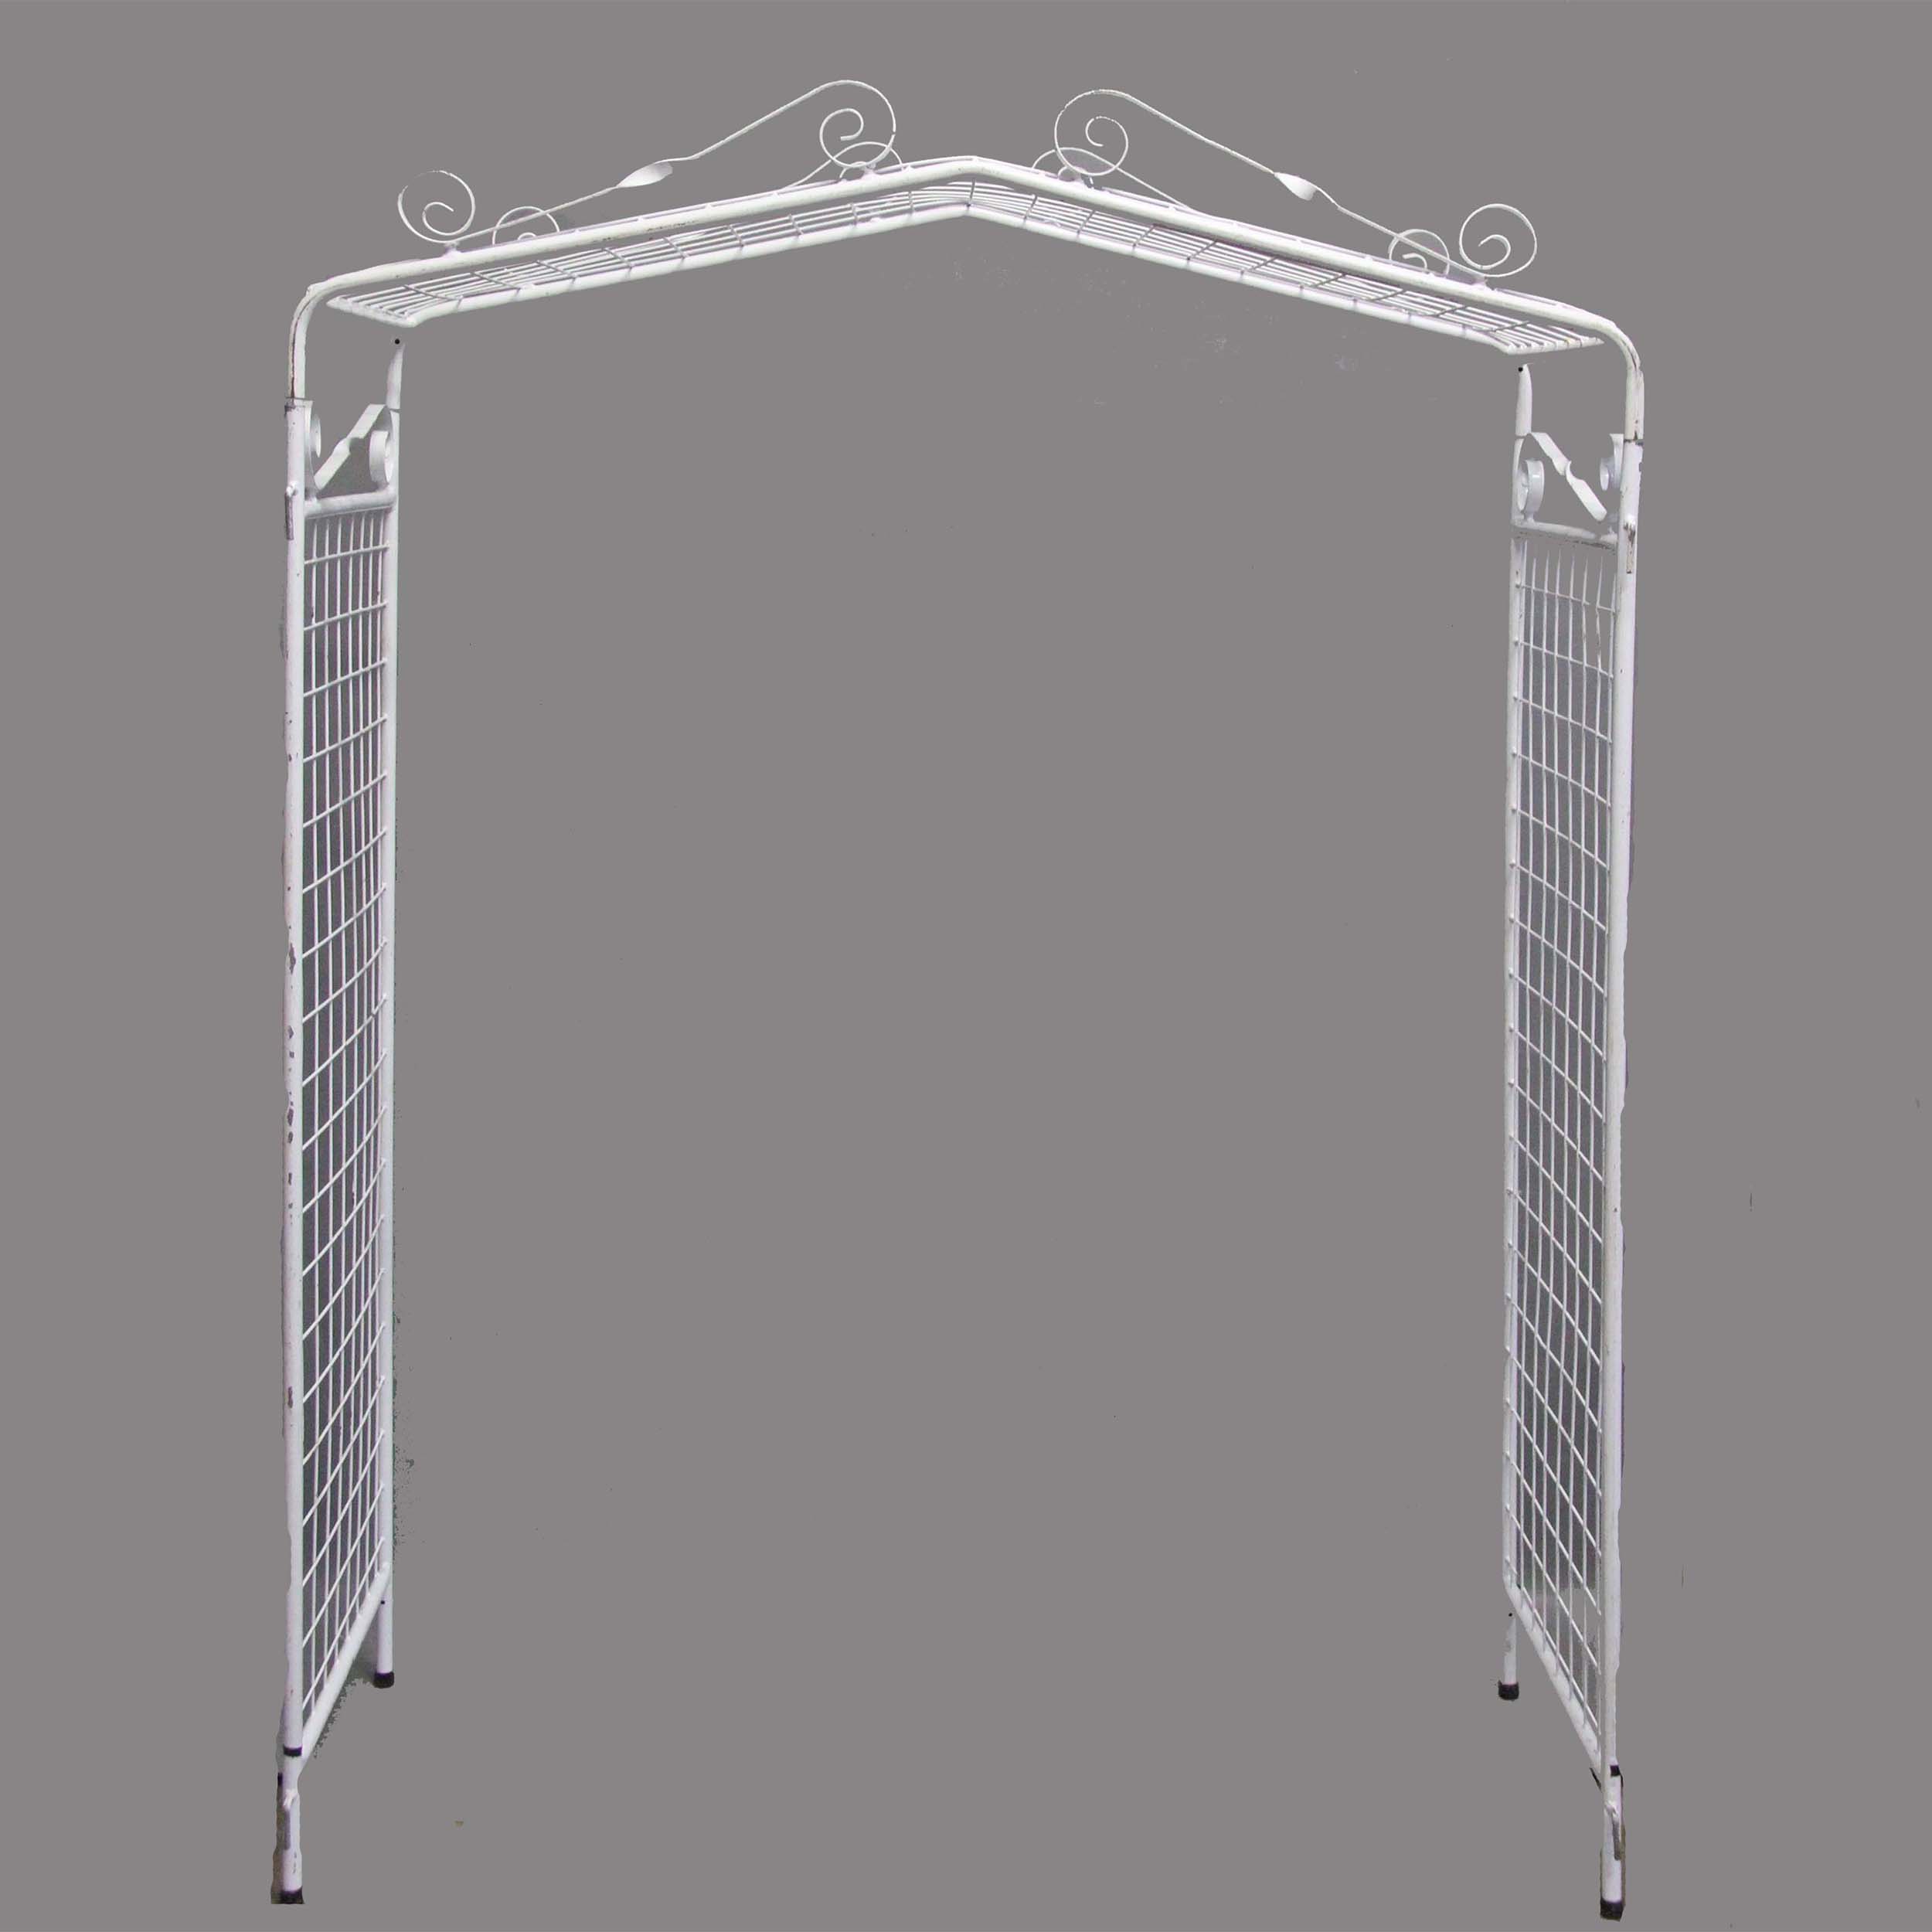 Harrisons Hiremaster Wanganui Party Hire White Metal Wedding Arch